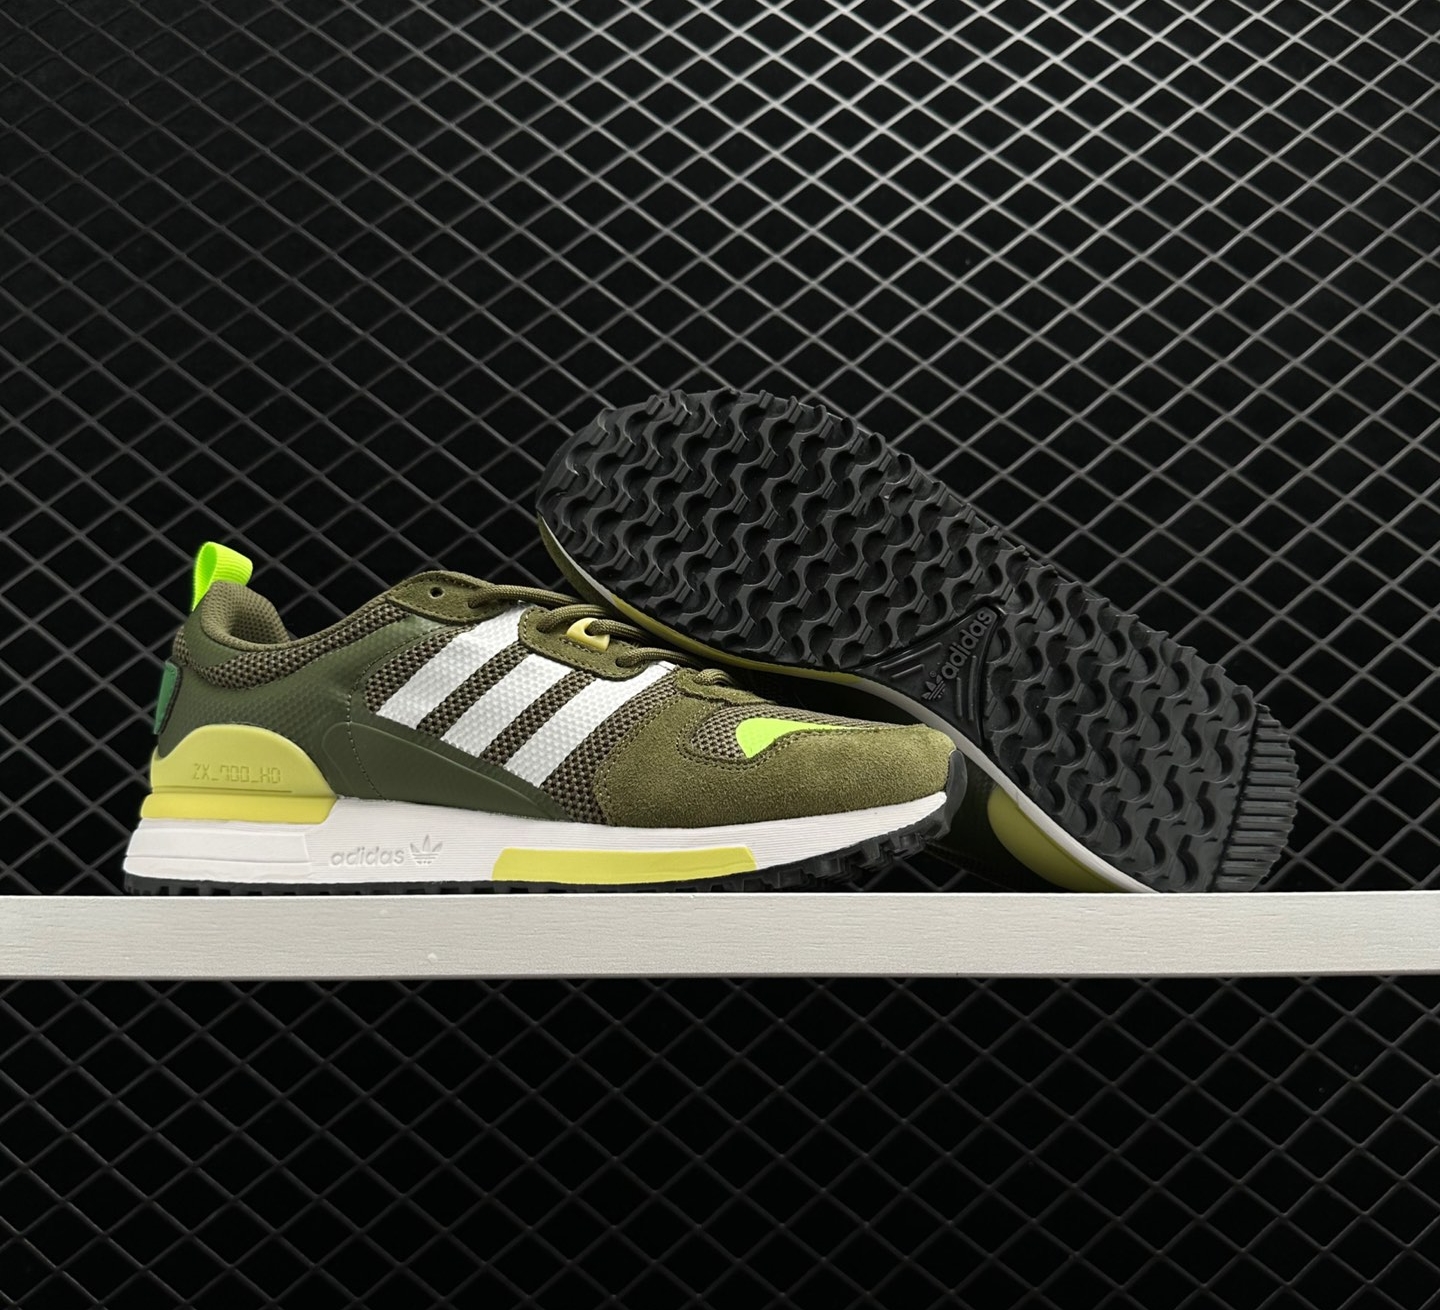 Adidas ZX 700 HD 'Wild Pine' FX7022 - Stylish and Comfortable Sneakers